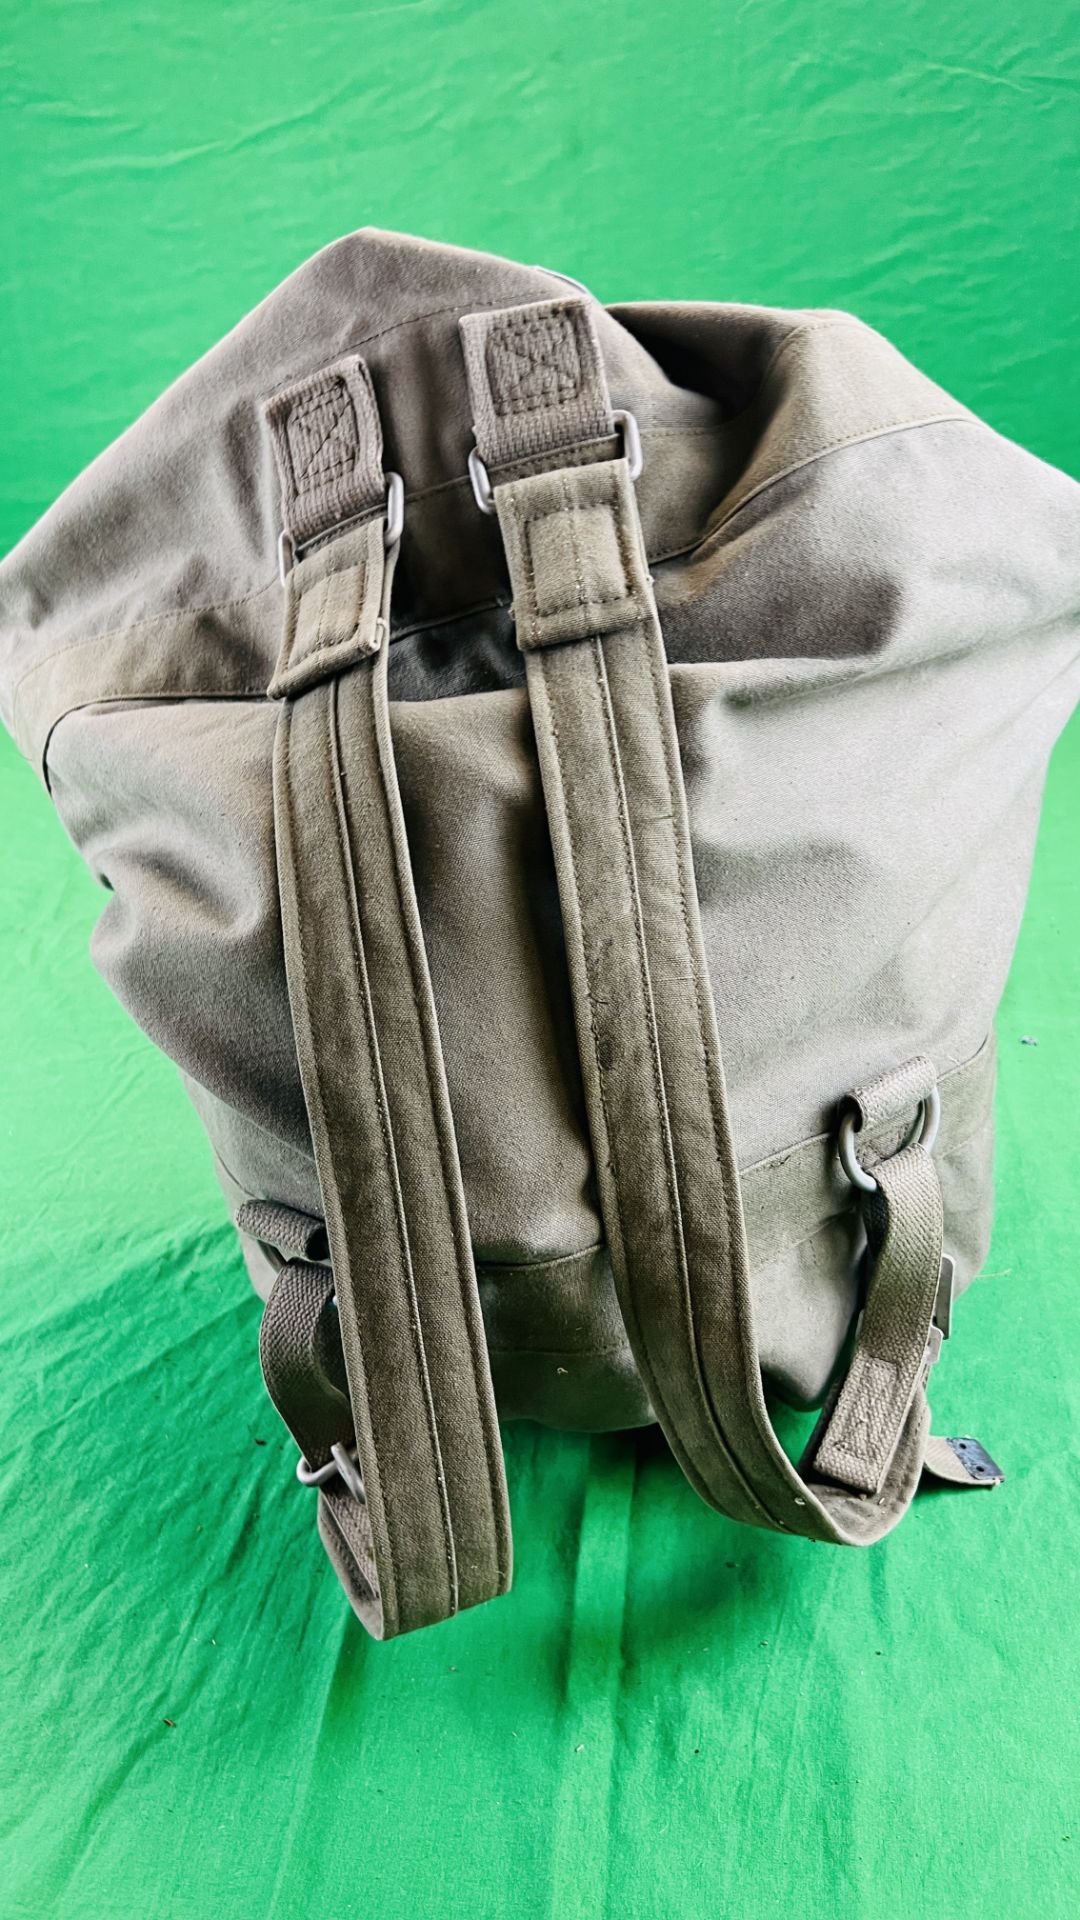 A CARRY BAG CONTAINING 33 MIXED HALF BODY DECOYS, - Image 12 of 12